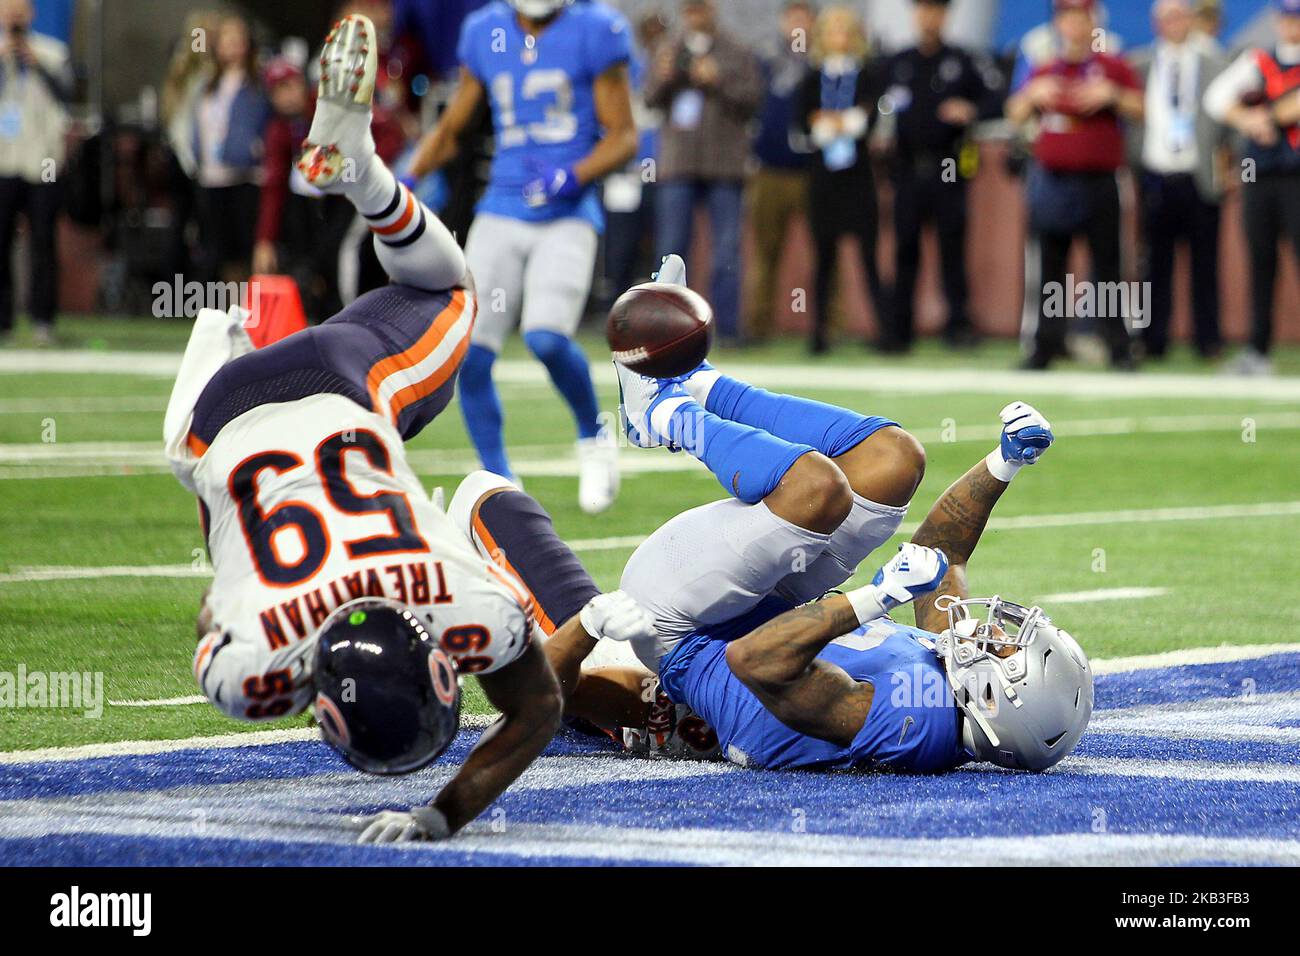 Detroit Lions wide receiver Kenny Golladay (19) is sacked by Chicago Bears cornerback Kyle Fuller (23) as Chicago Bears inside linebacker Danny Trevathan (59) falls into the endzone during the second half of an NFL football game against the Chicago Bears in Detroit, Michigan USA, on Thursday, November 22, 2018. (Photo by Amy Lemus/NurPhoto) Stock Photo